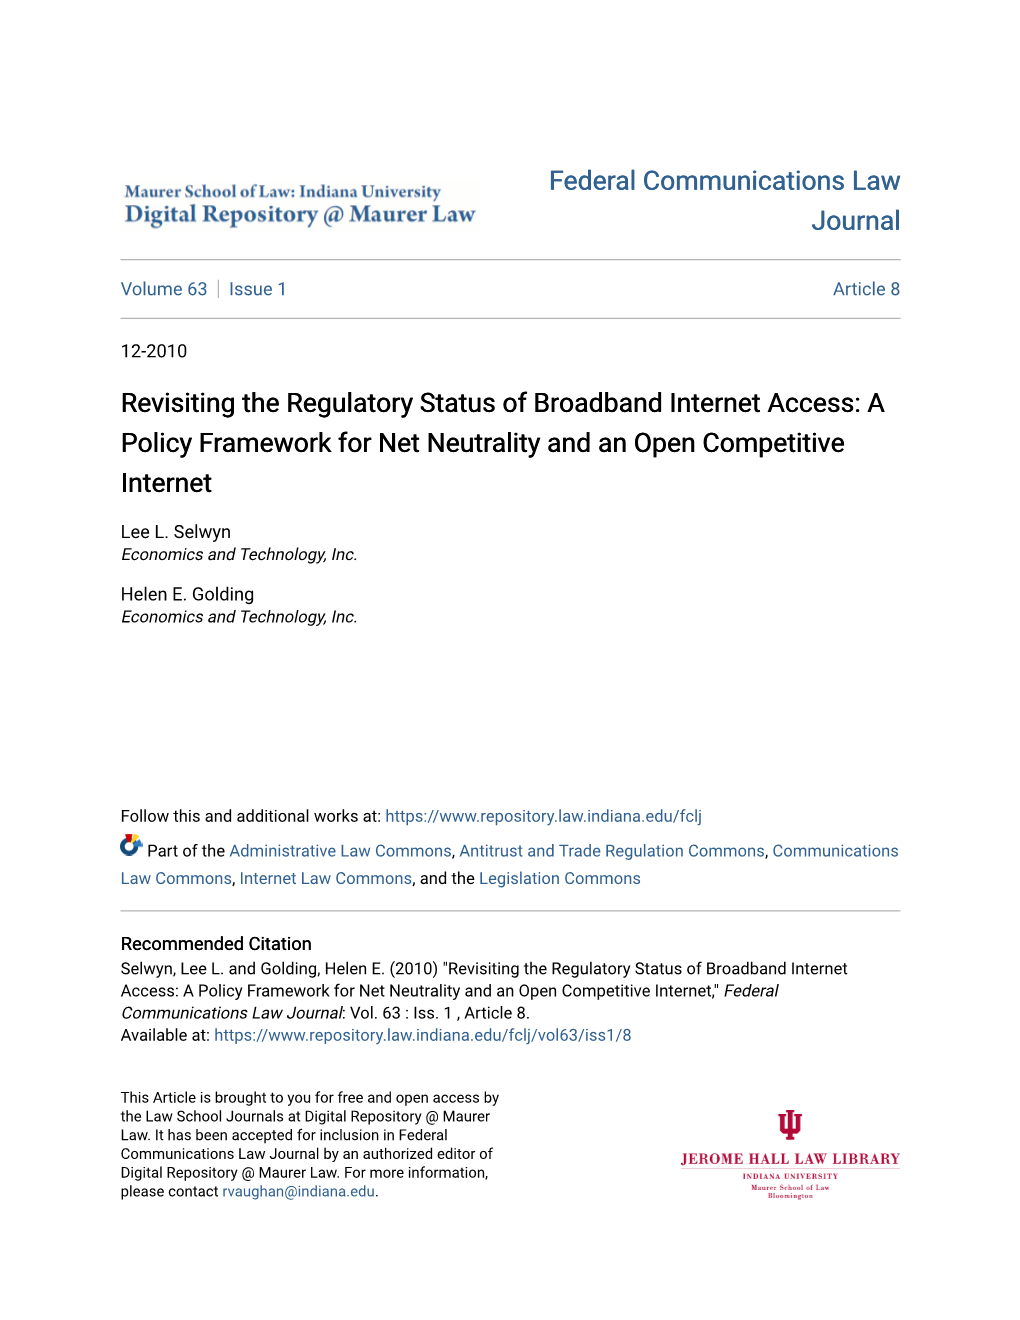 Revisiting the Regulatory Status of Broadband Internet Access: a Policy Framework for Net Neutrality and an Open Competitive Internet